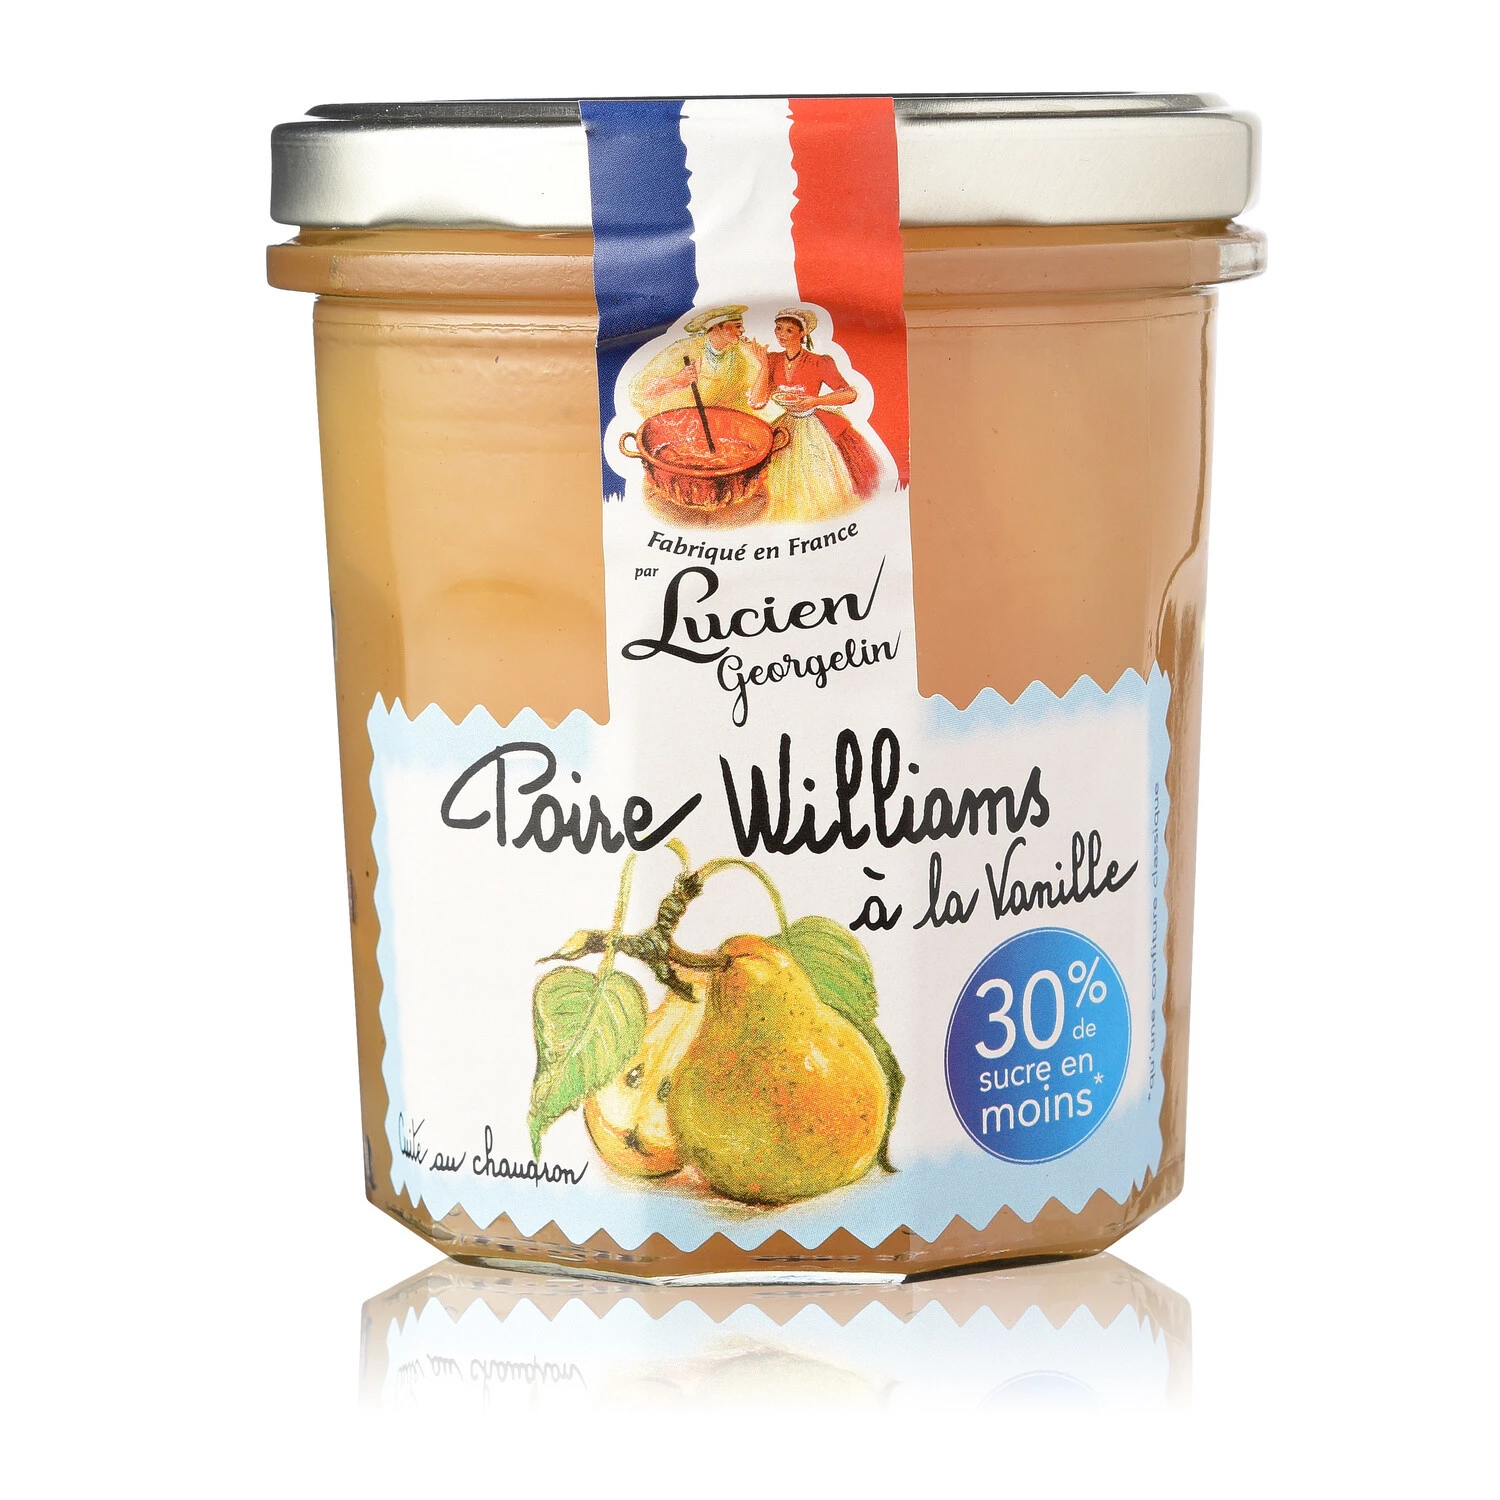 Gourmet and Light Williams Pear Jam with Vanilla 320g - LUCIEN GEORGELIN